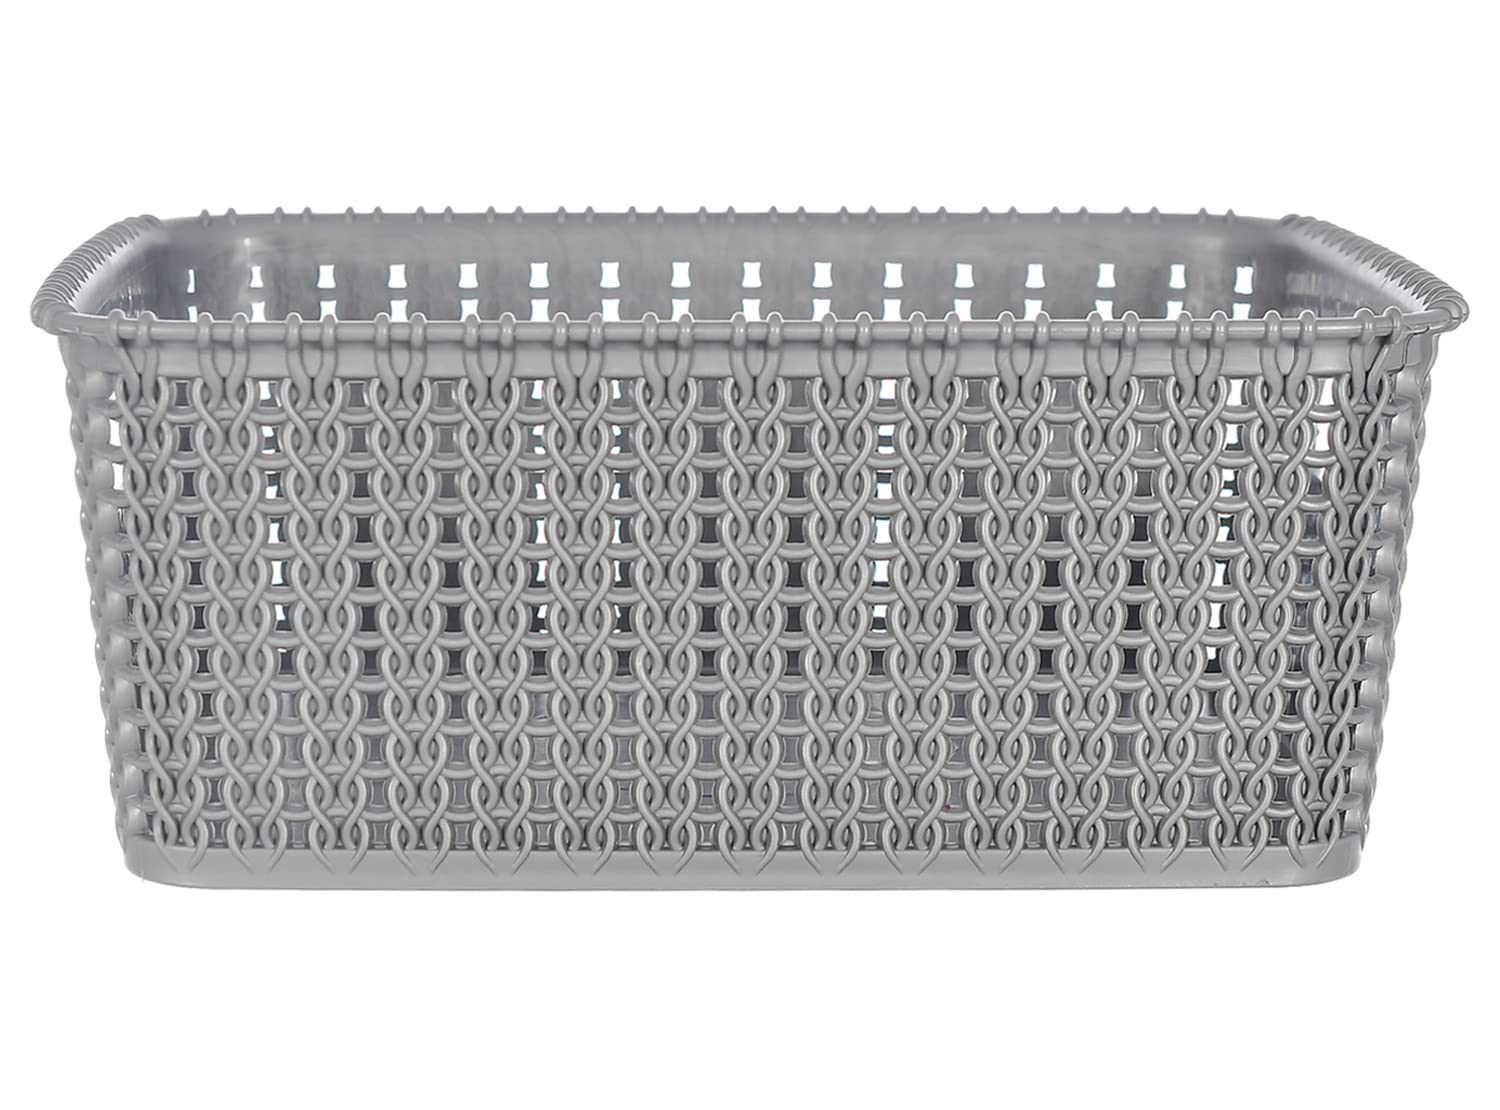 Kuber Industries Multiuses Large & Small Size M 20-15 Plastic Basket/Organizer Without Lid- Set of 2 (Grey) -46KM0137